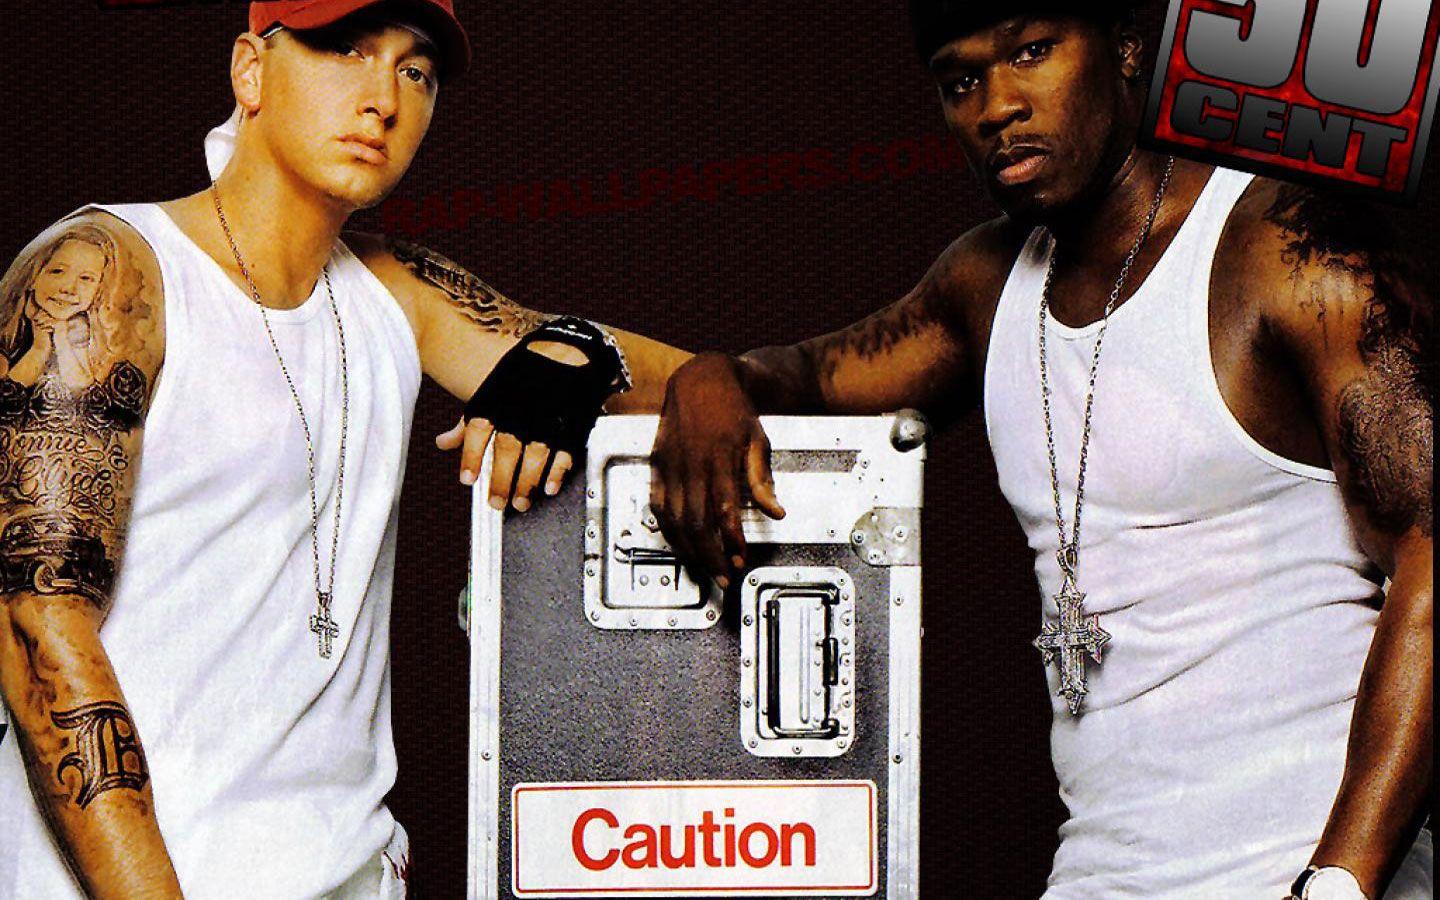 EMINEM FIFTY 50 CENT CAUTION POSTER 22x34 NEW FREE FAST SHIPPING